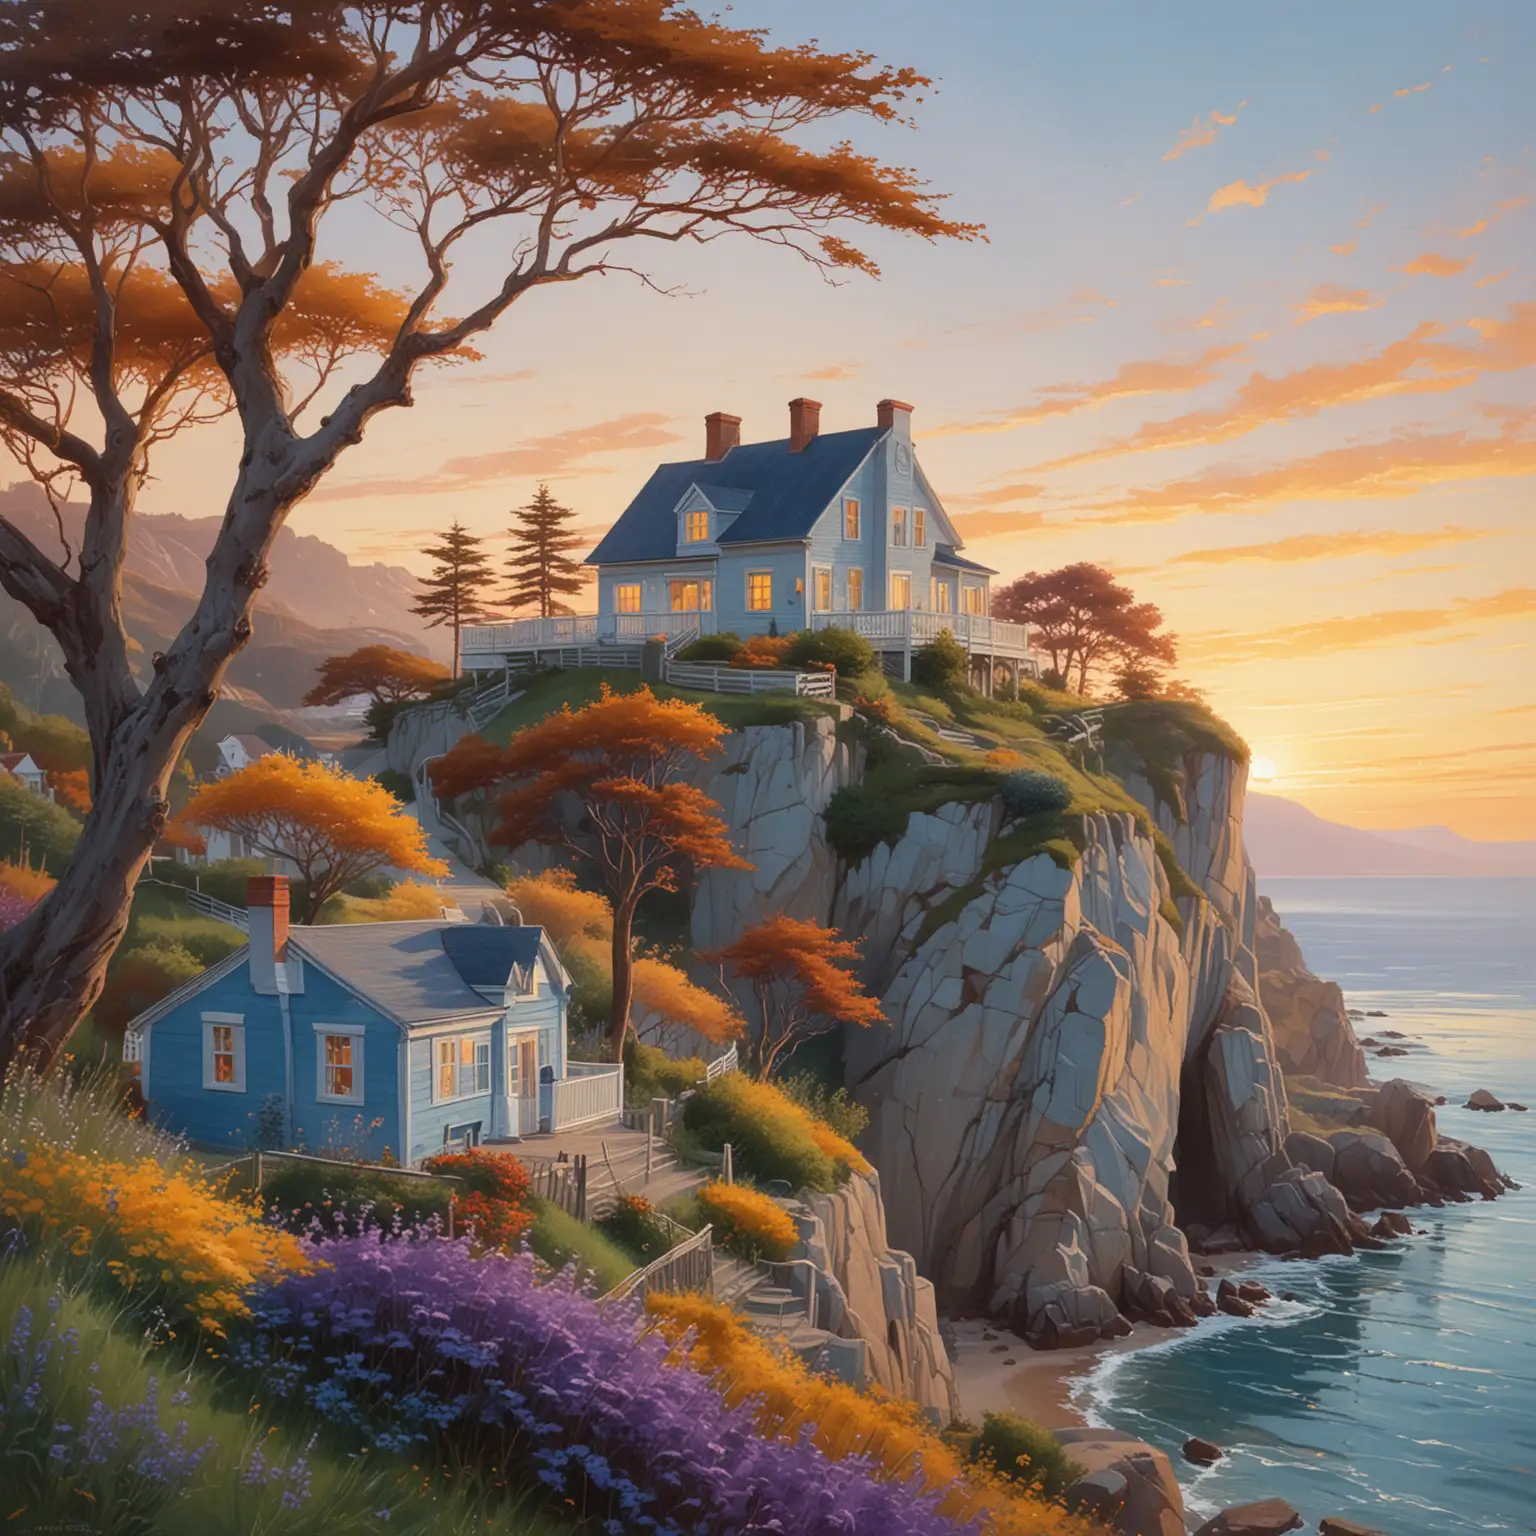 The image depicts a serene coastal scene at sunset. In the foreground, there is a quaint, light blue house perched on the edge of a steep cliff. The cliff has a rugged texture and overlooks a calm body of water that reflects the golden hues of the setting sun. The sun is low in the sky, casting a warm, soft glow over the landscape.

Near the house, there are several trees with dark blue foliage, adding a striking contrast to the otherwise warm tones of the scene. These trees have delicate, sparse leaves and thin branches that gracefully arch over the house. In the background, there are gentle, rolling hills and distant mountains, painted in soft shades of blue and purple, adding depth and a sense of tranquility to the composition.

The overall color palette consists of warm yellows, soft oranges, and various shades of blue, creating a harmonious and peaceful atmosphere. The artistic style of the image is reminiscent of a dreamy, impressionistic painting with smooth brush strokes and a focus on capturing the mood of the moment.